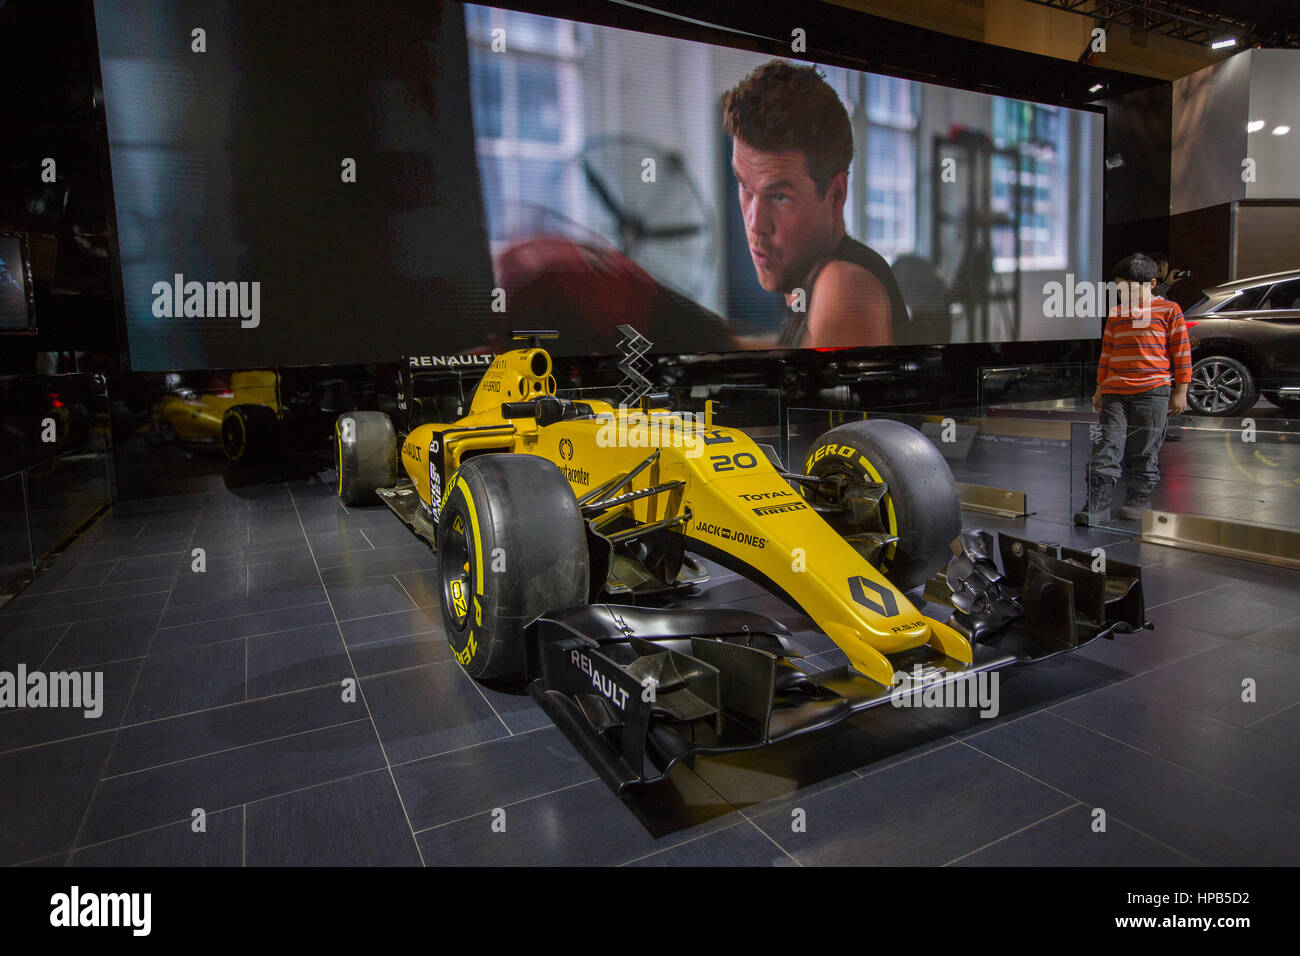 A young boy look at a yellow formula 1 race car Renault on display at the autoshow Stock Photo